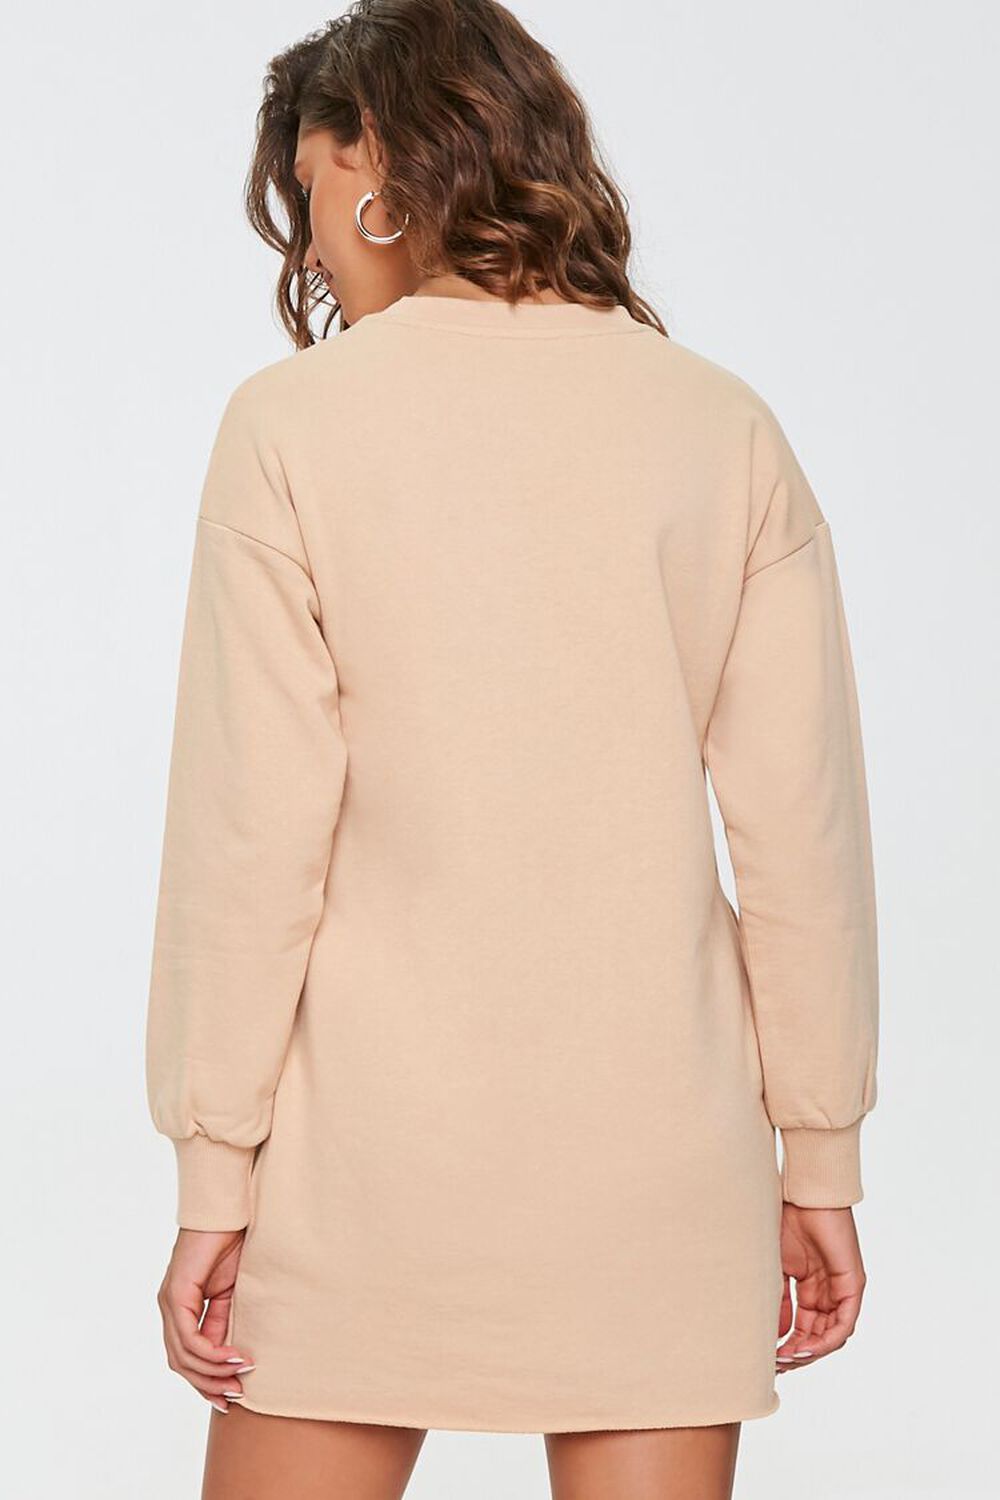 TAUPE French Terry Sweatshirt Dress, image 3